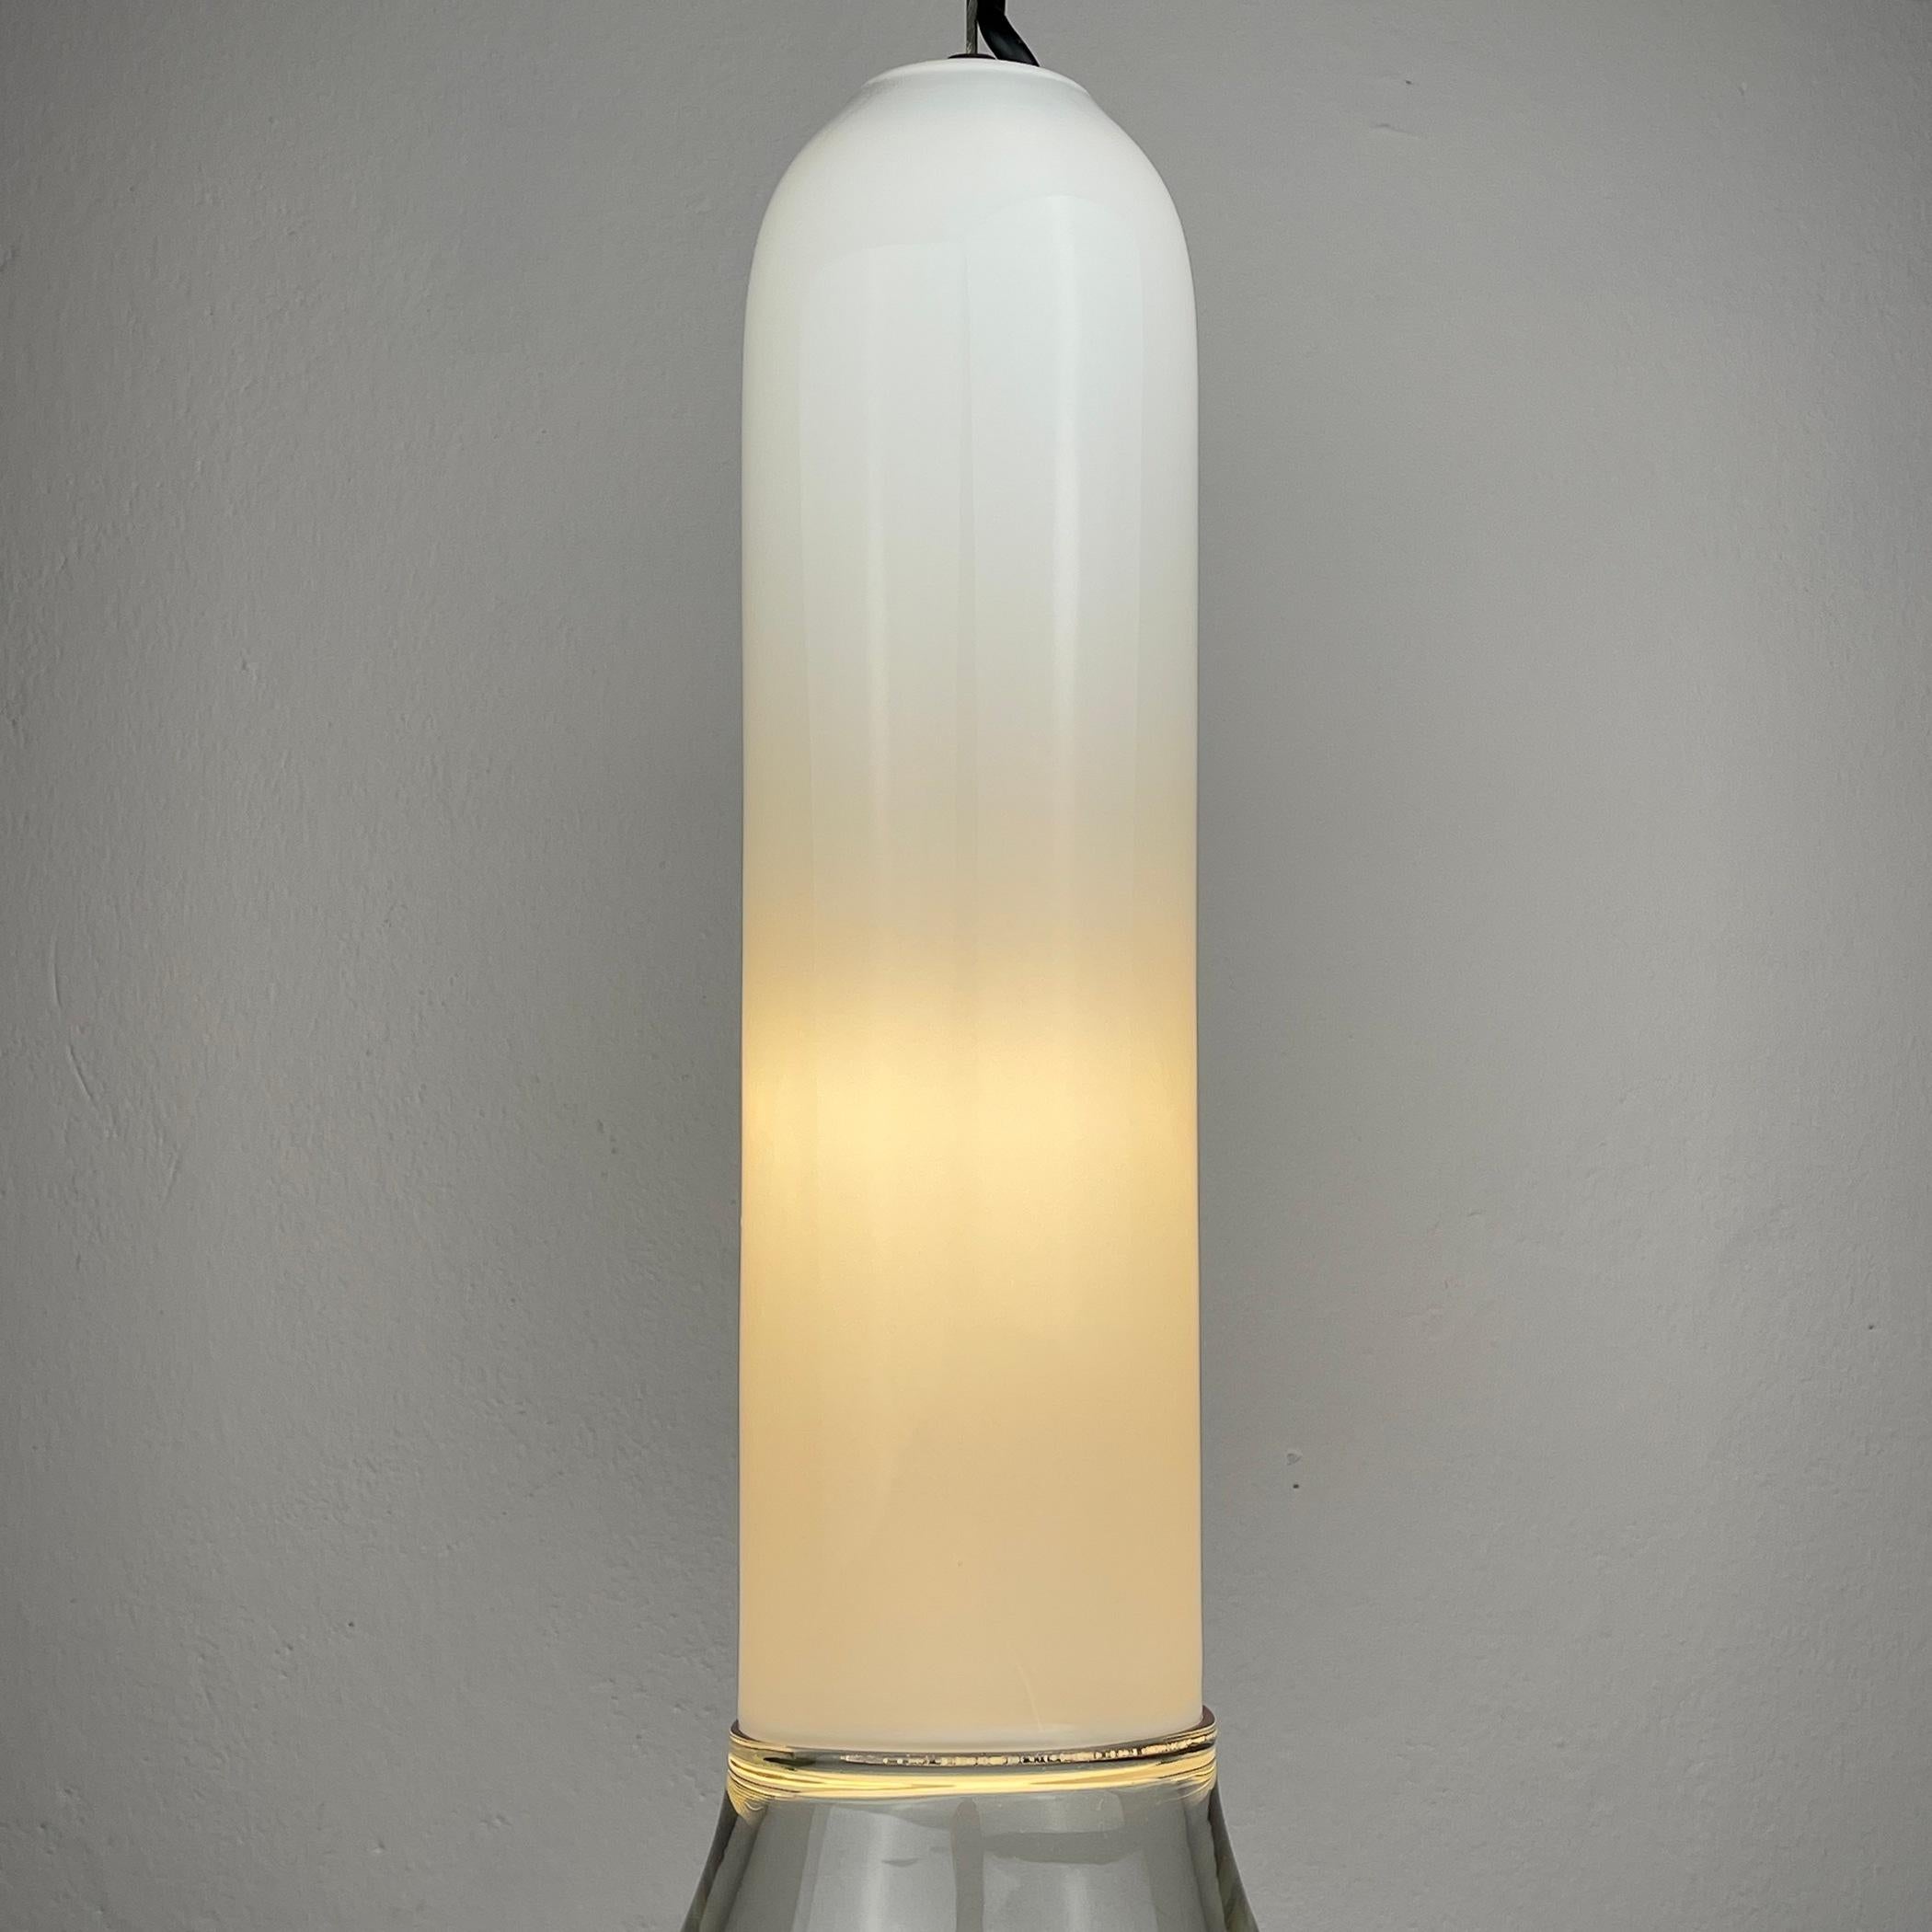 Murano pendant lamp Samanta by Roberto Pamio for Leucos Italy 1970s For Sale 6